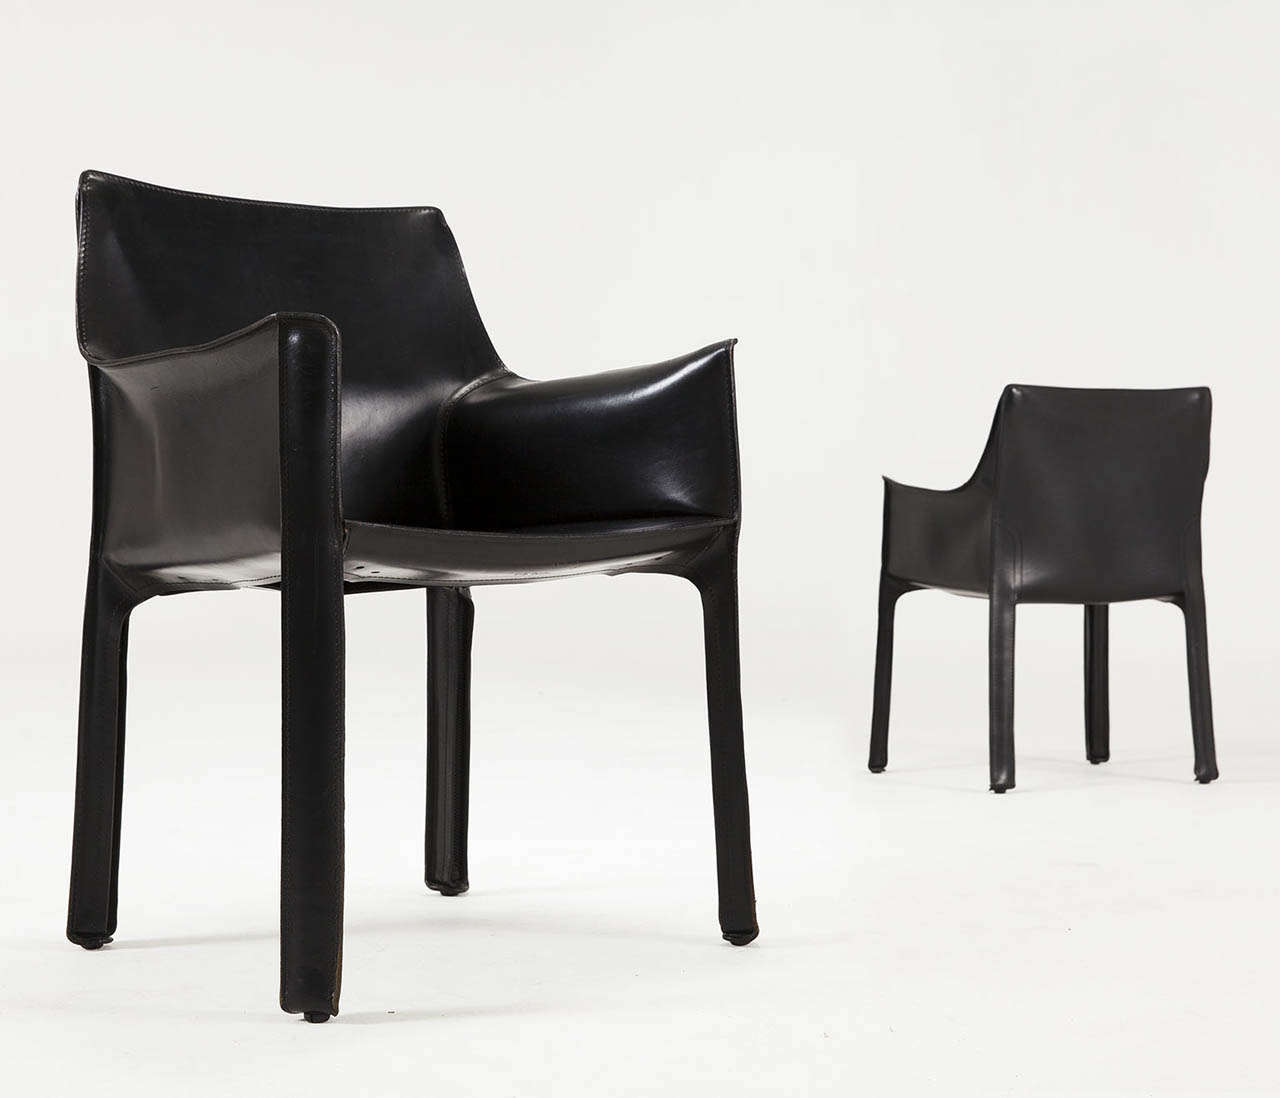 Mario Bellini for Cassina, Pair of CAB 415 armchairs, metal and black leather, Italy, 1987.

These armchairs designed by Mario Bellini in the 1980s. Conceptually, the chair was designed to become marked and shaped over time by its user. The